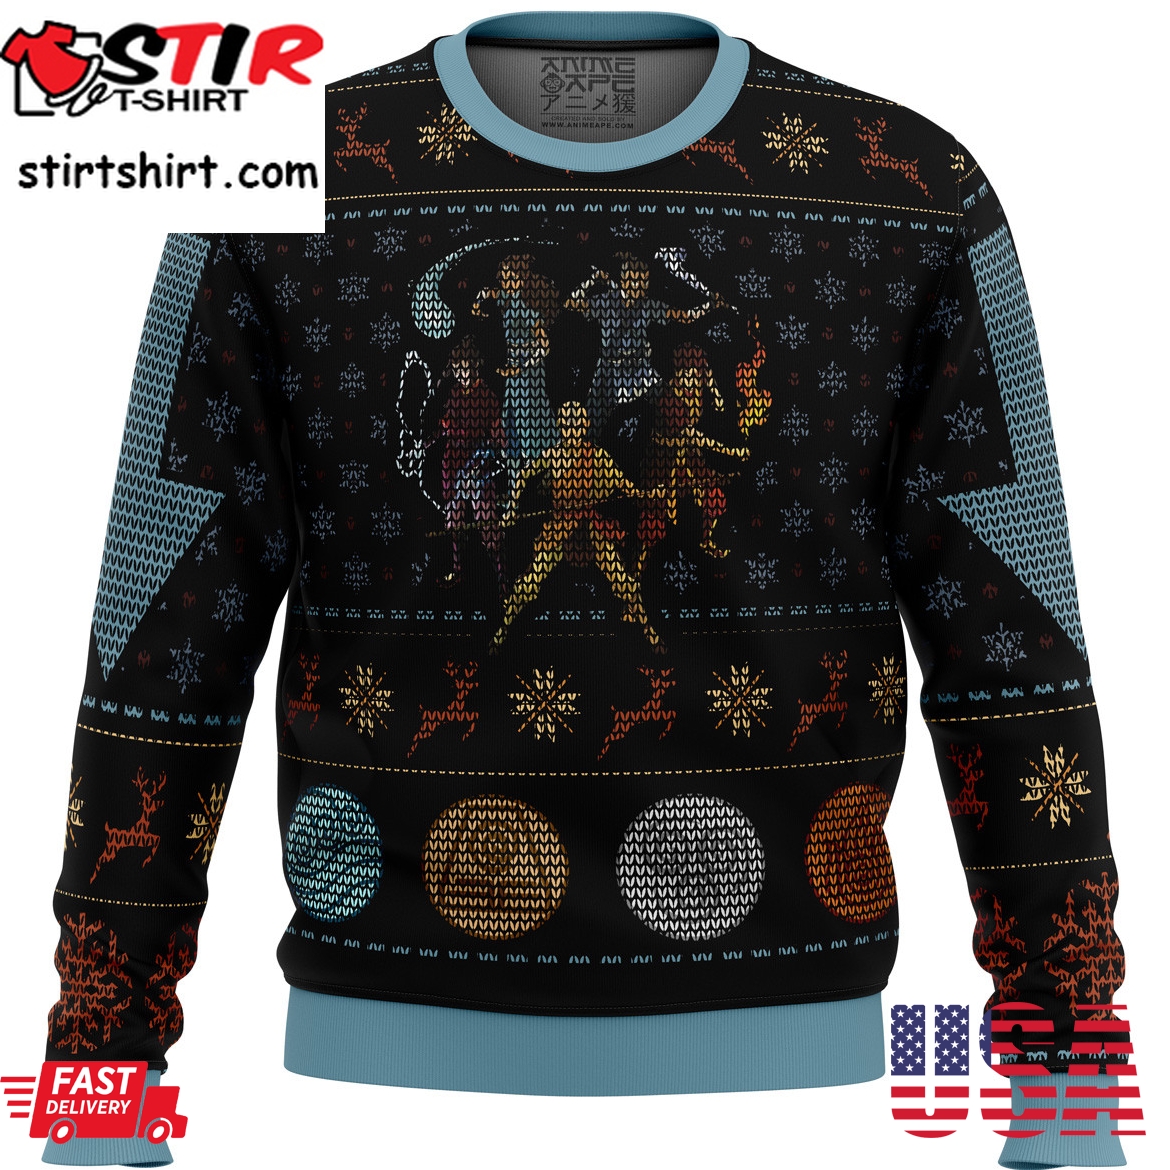 Avatar The Last Airbender Ugly Sweater